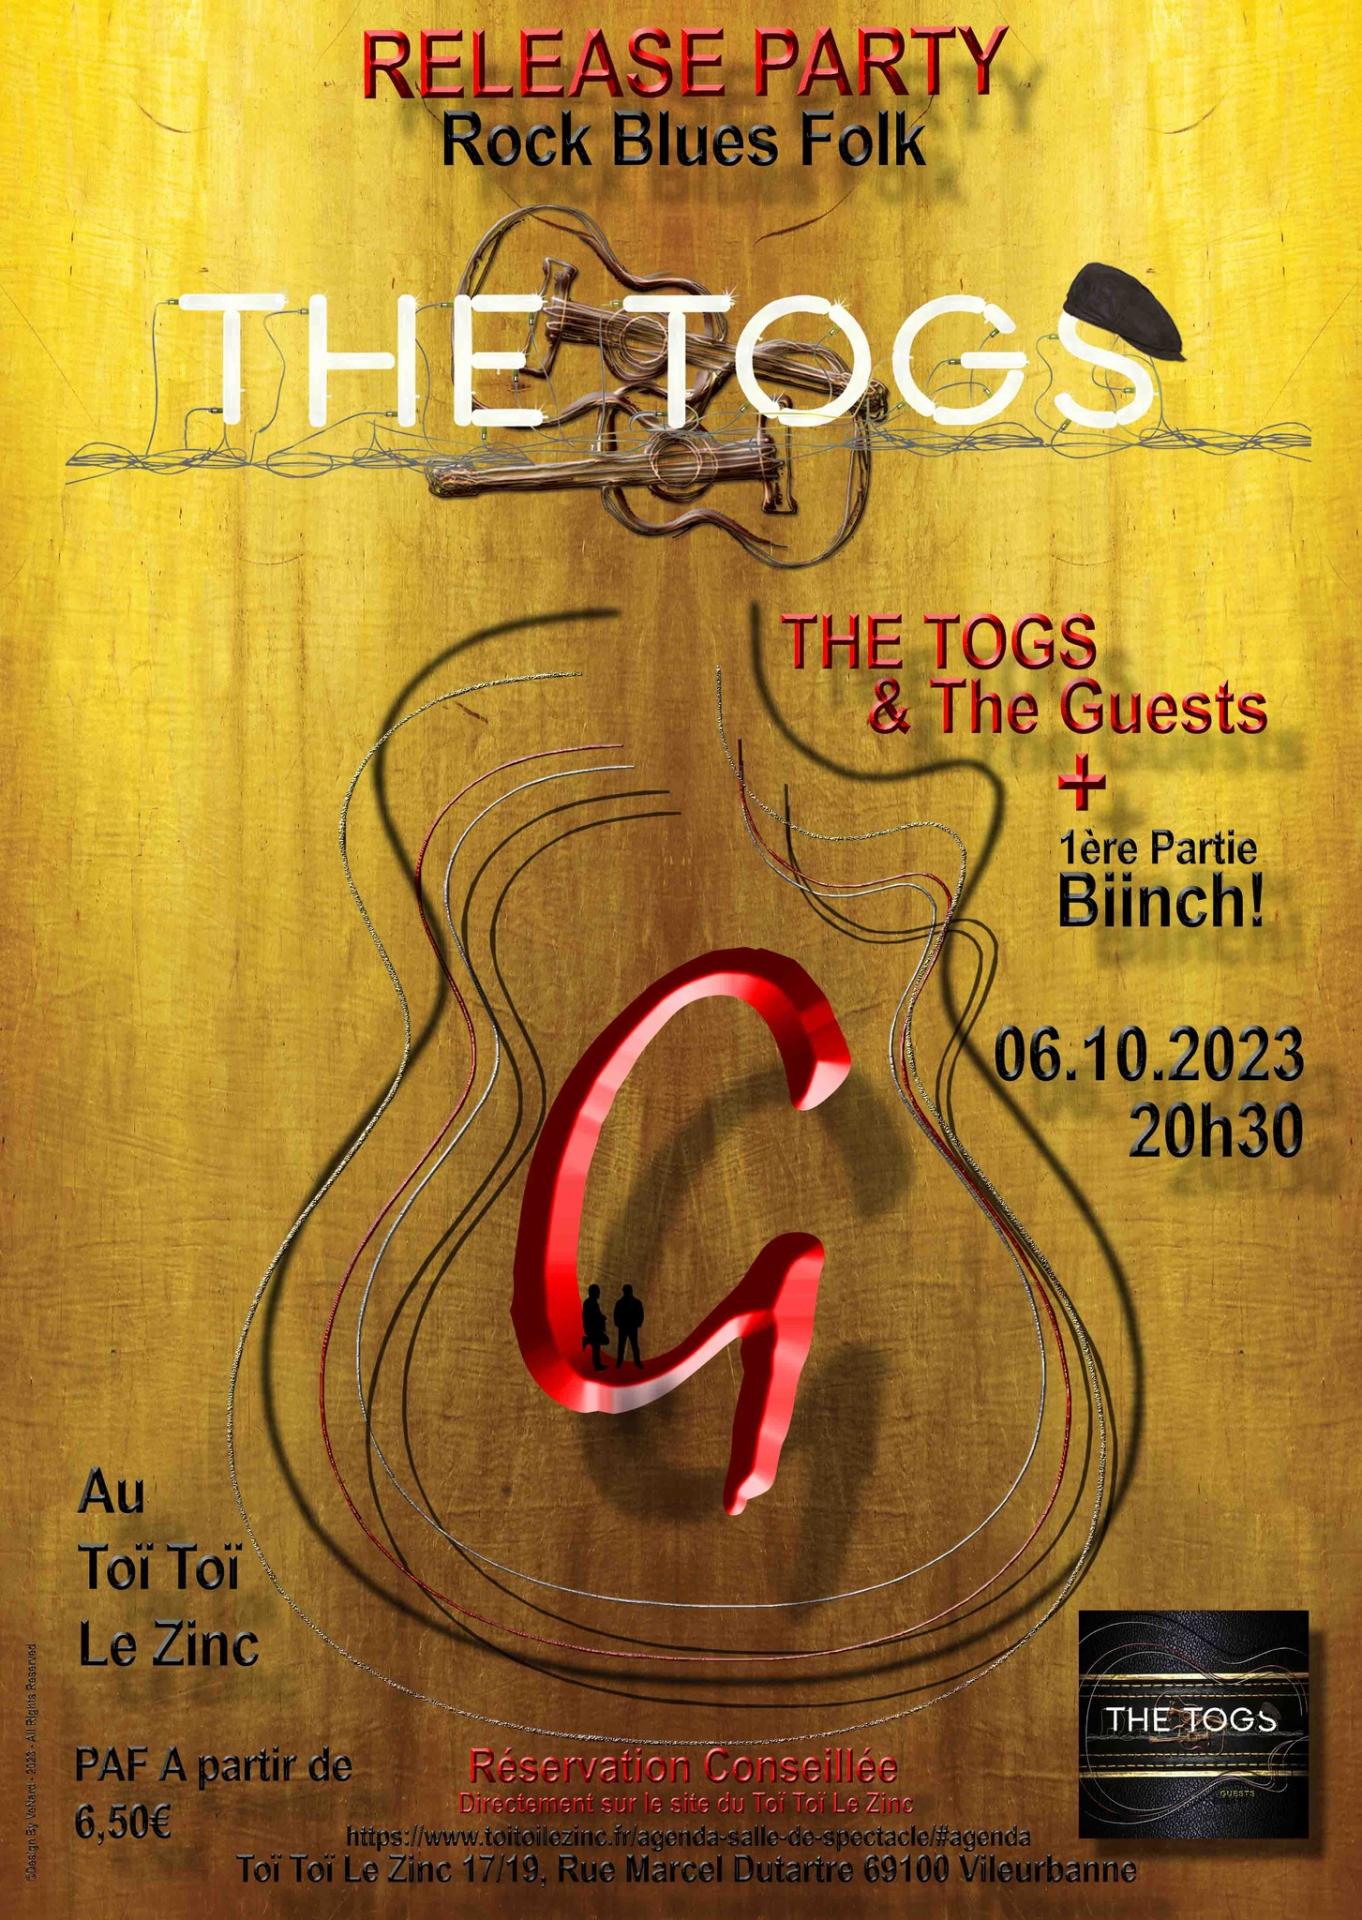 The togs release party